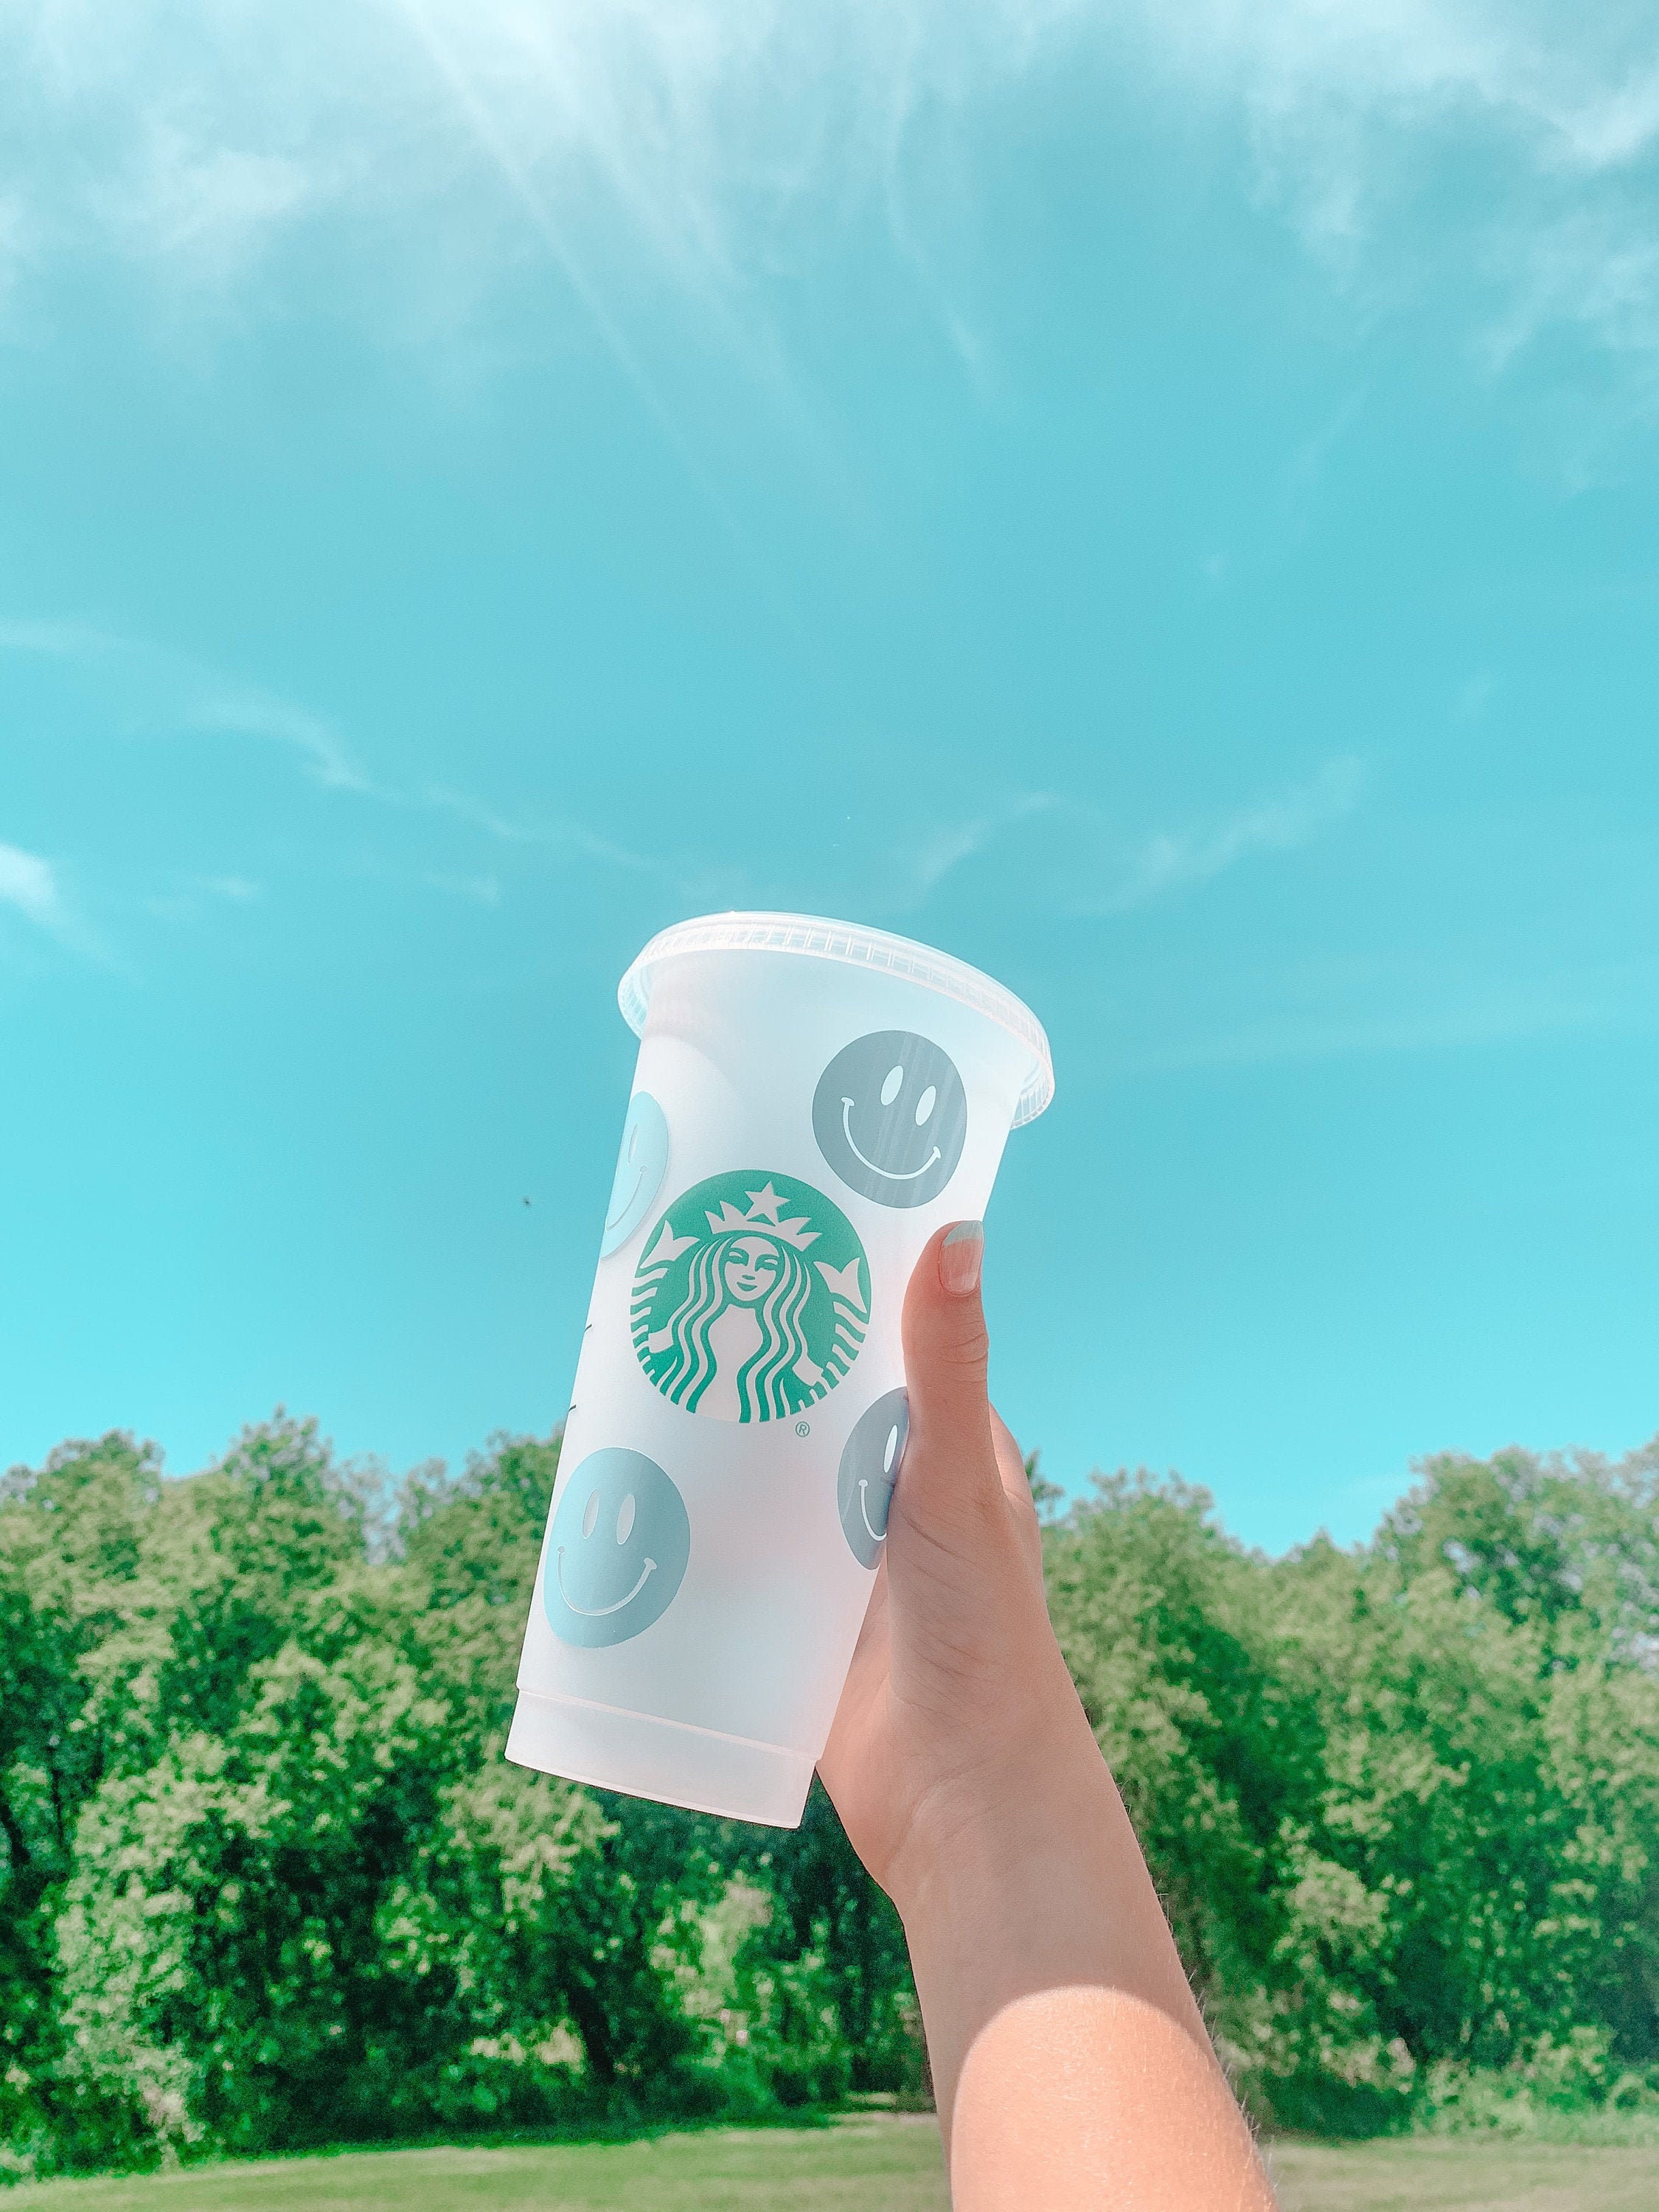 Reusable Cold Cup with Preppy Monkeys- used for iced coffee, frappes and  more - comes with reusable straw | NOT DISHWASHER SAFE